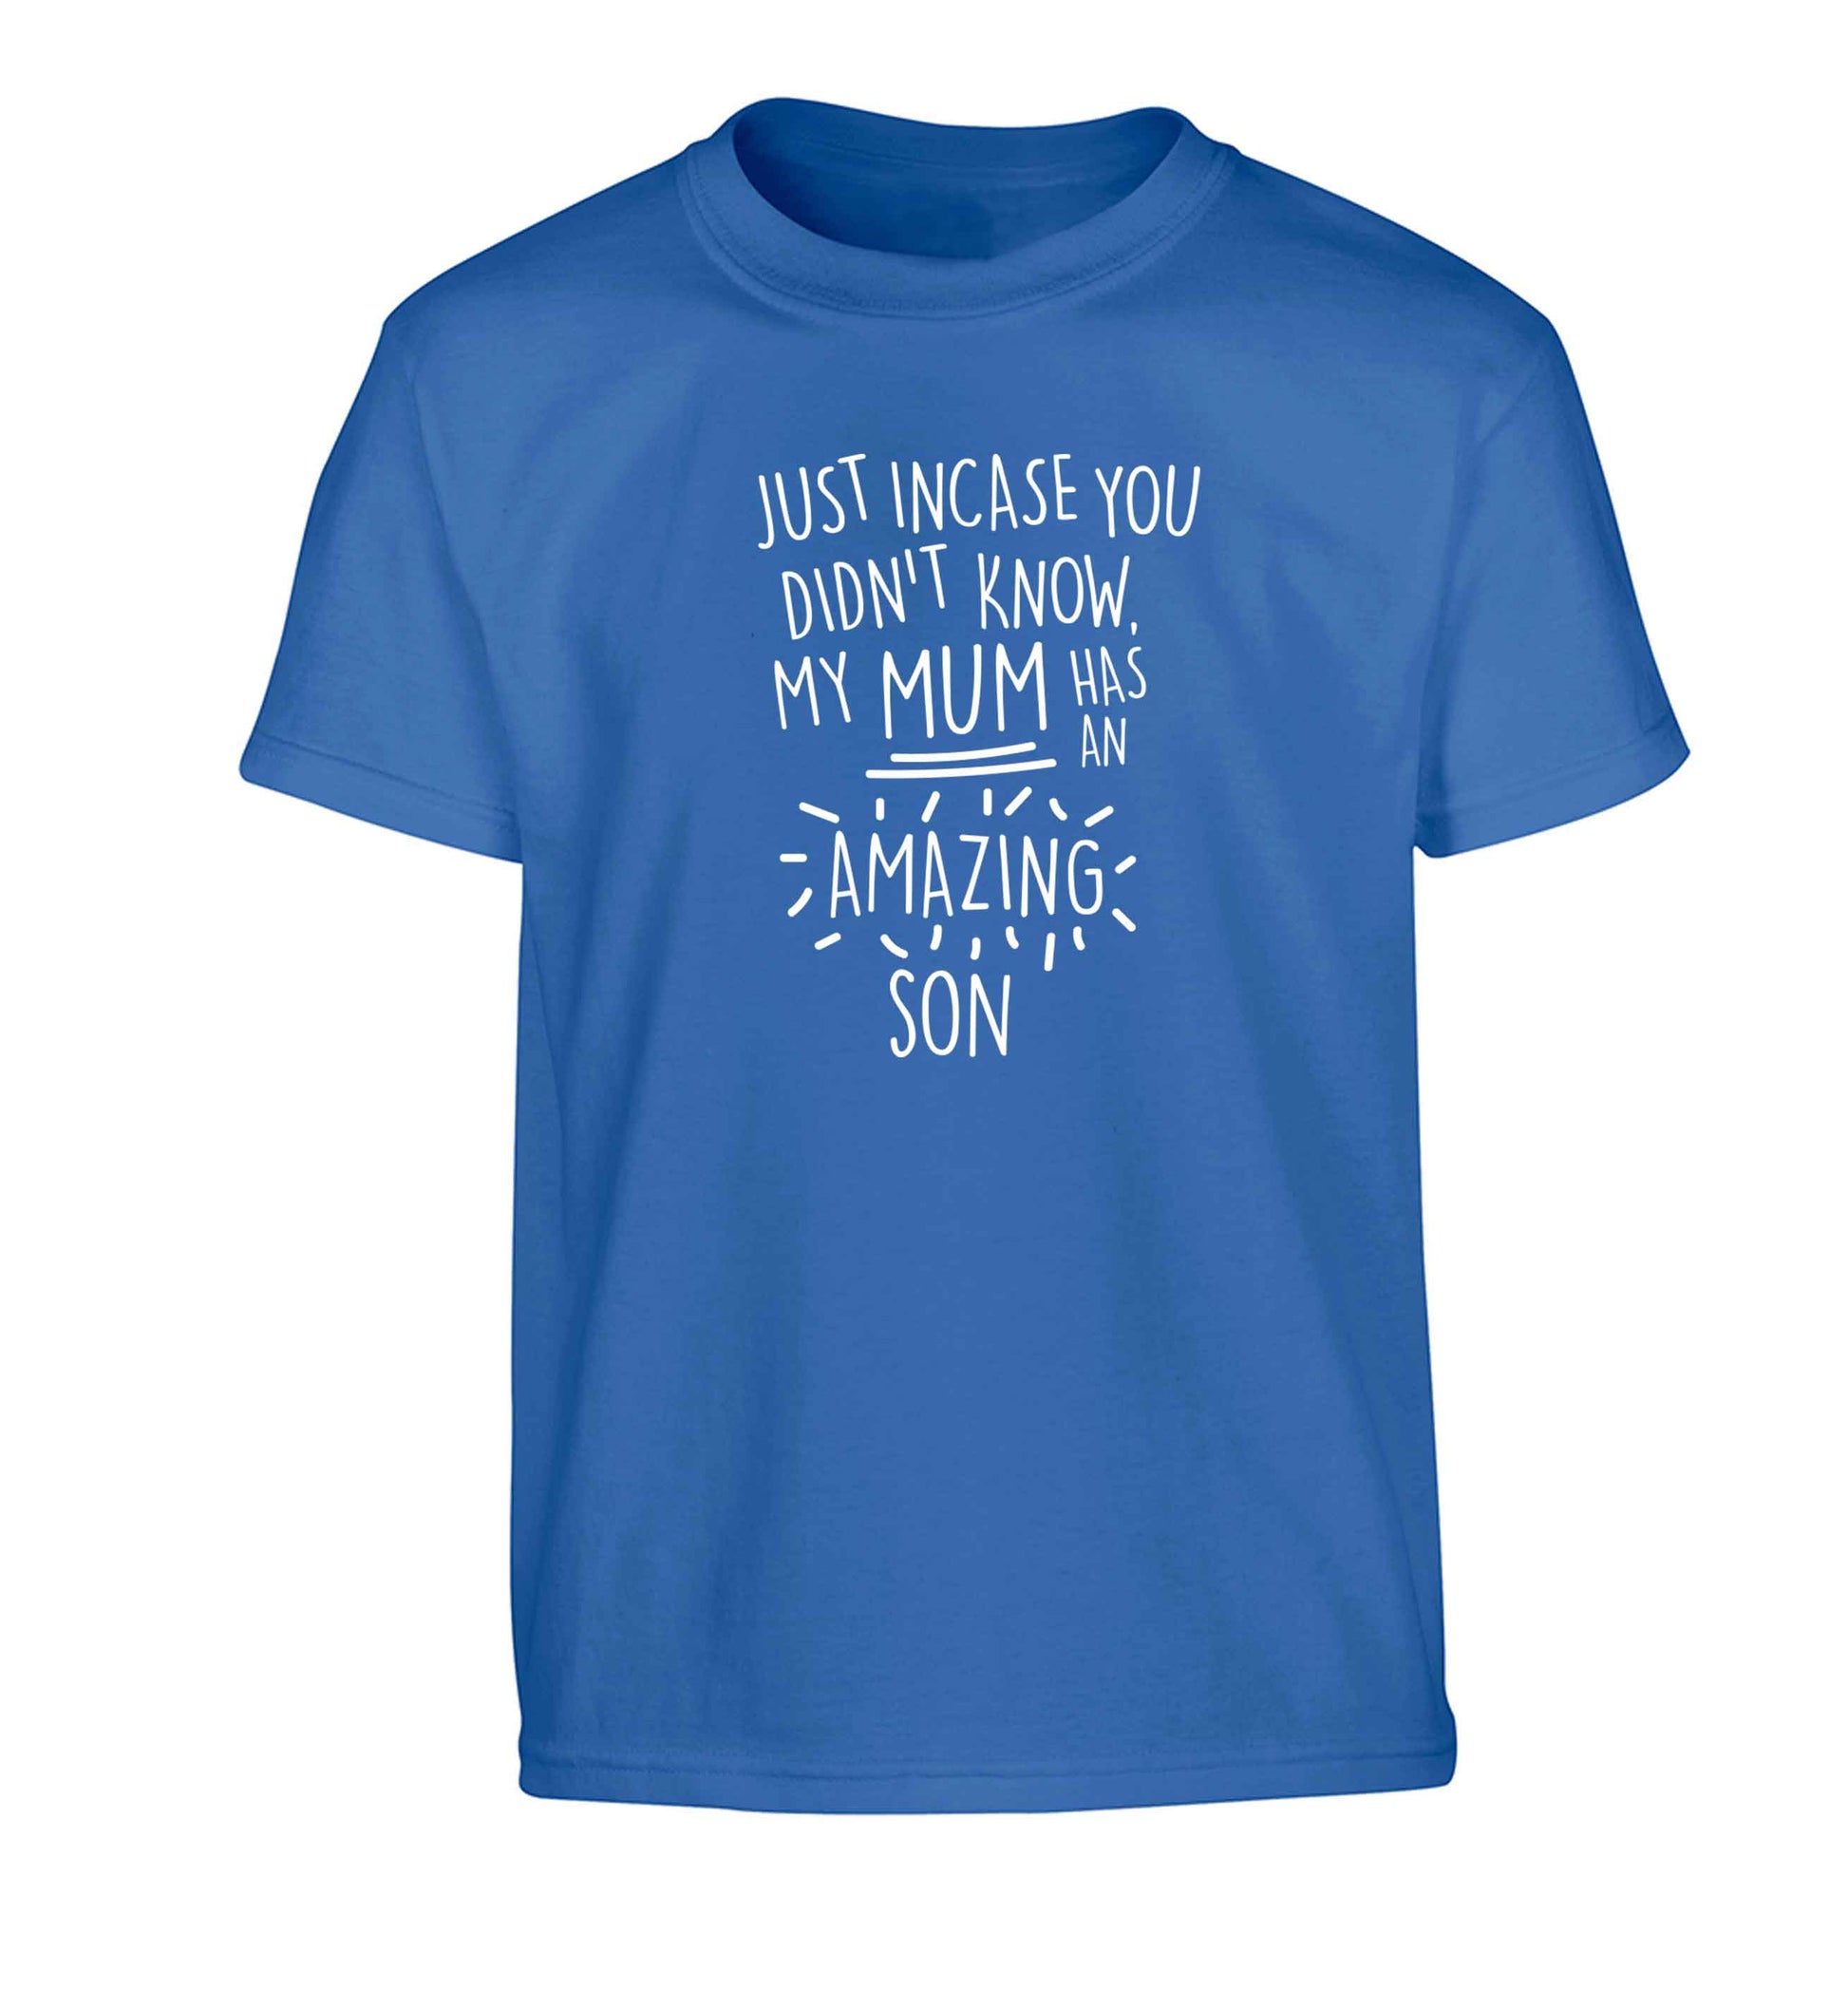 Just incase you didn't know my mum has an amazing son Children's blue Tshirt 12-13 Years